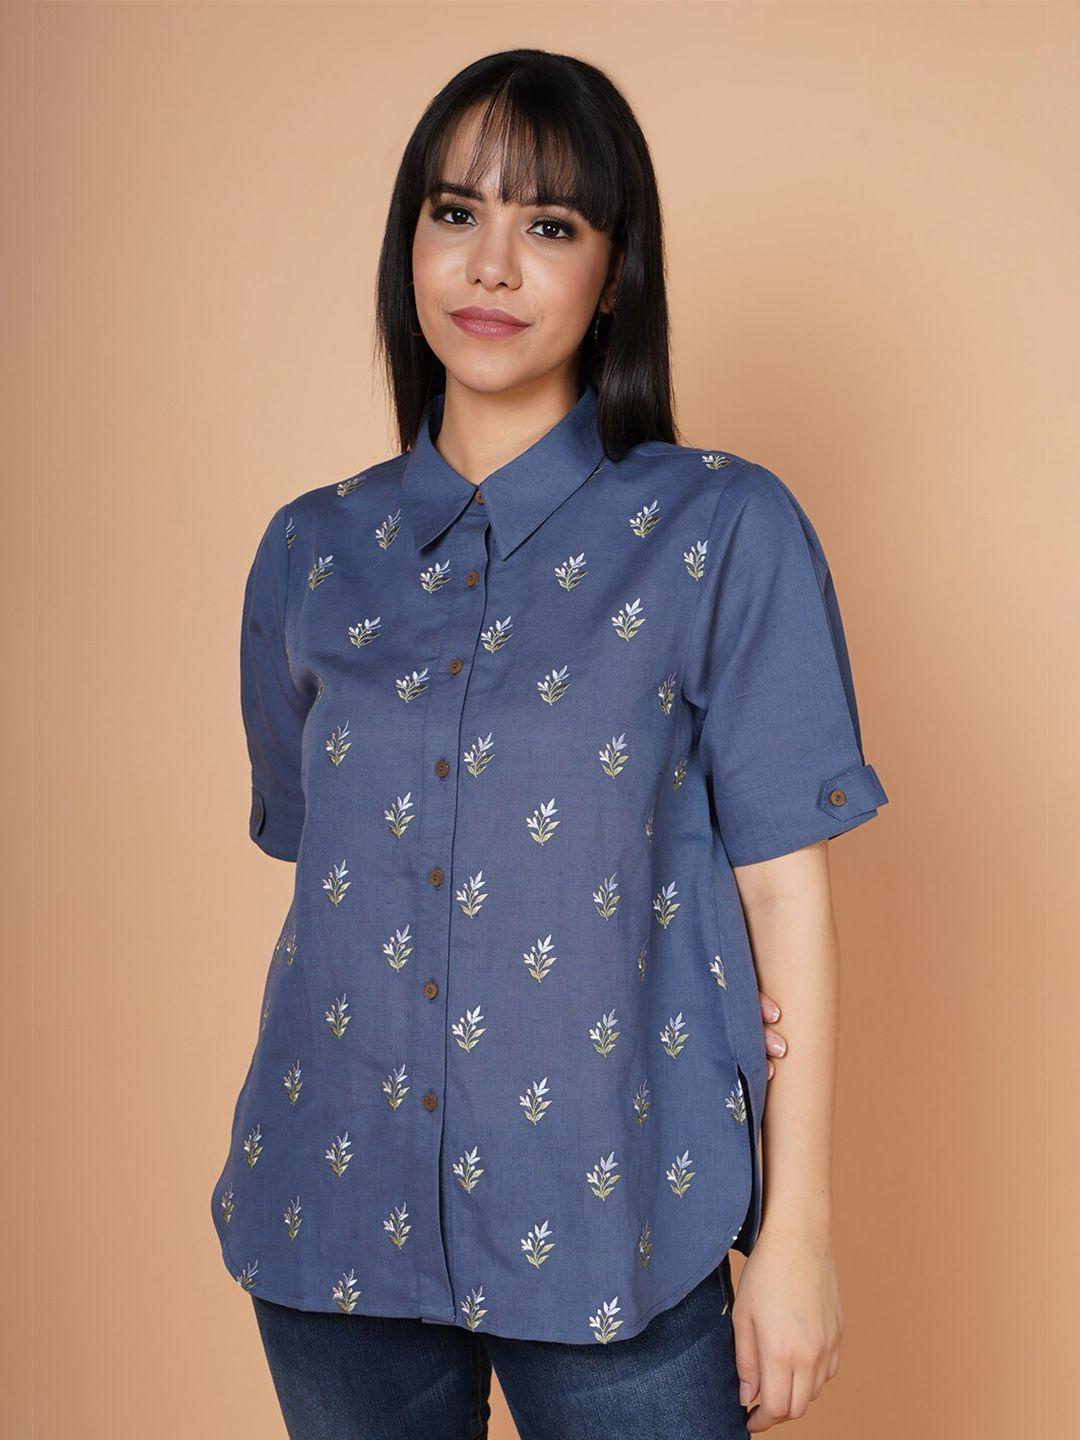 house of s women blue floral embroidered linen casual shirt